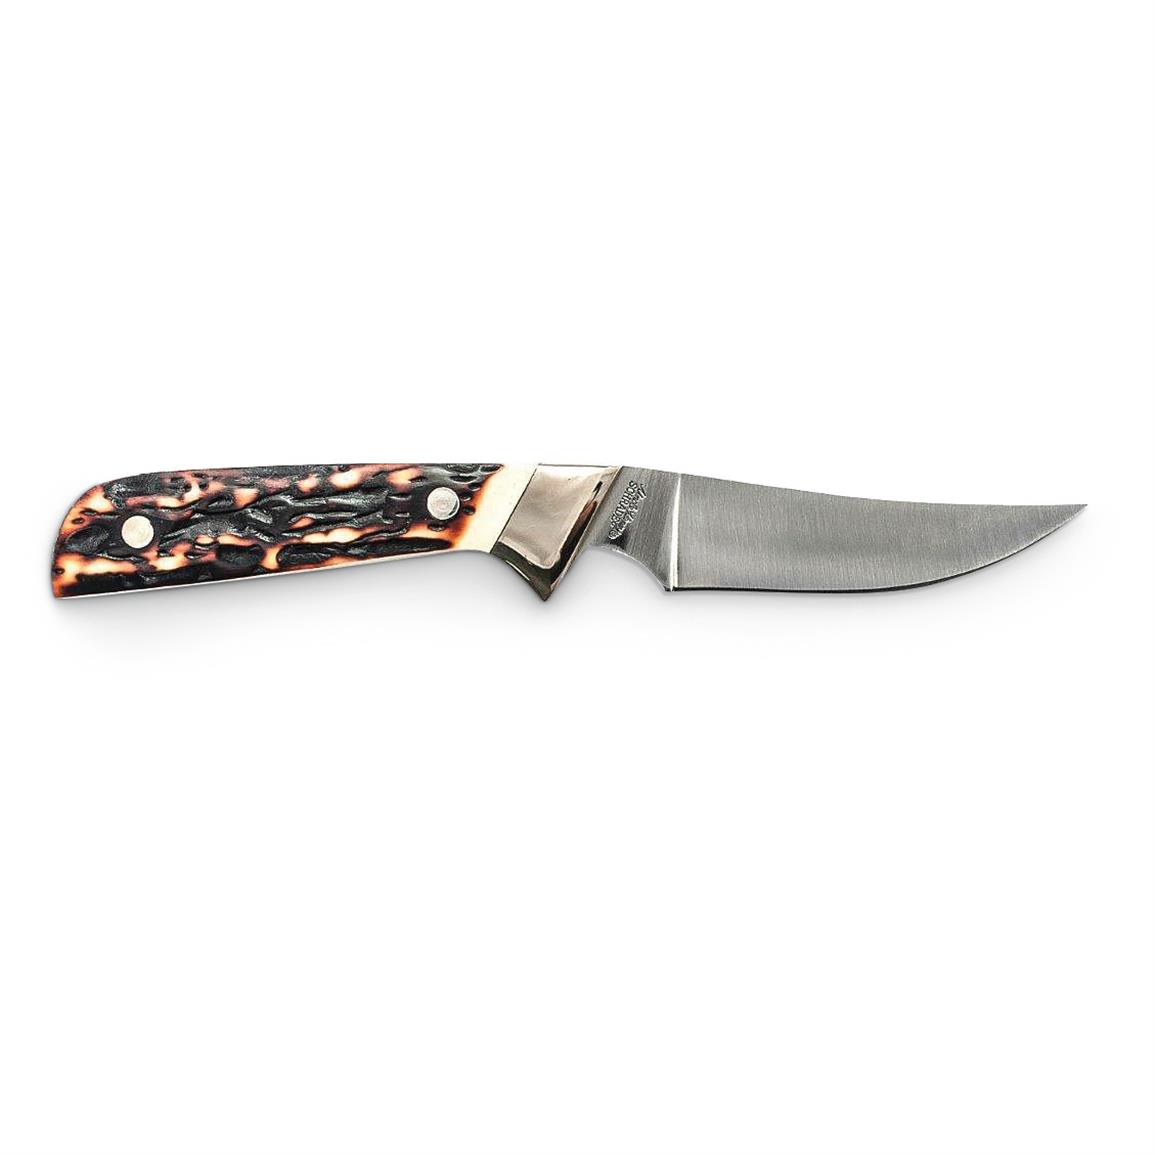 Uncle Henry Wolverine Full Tang Fixed Blade Knife, 3.4